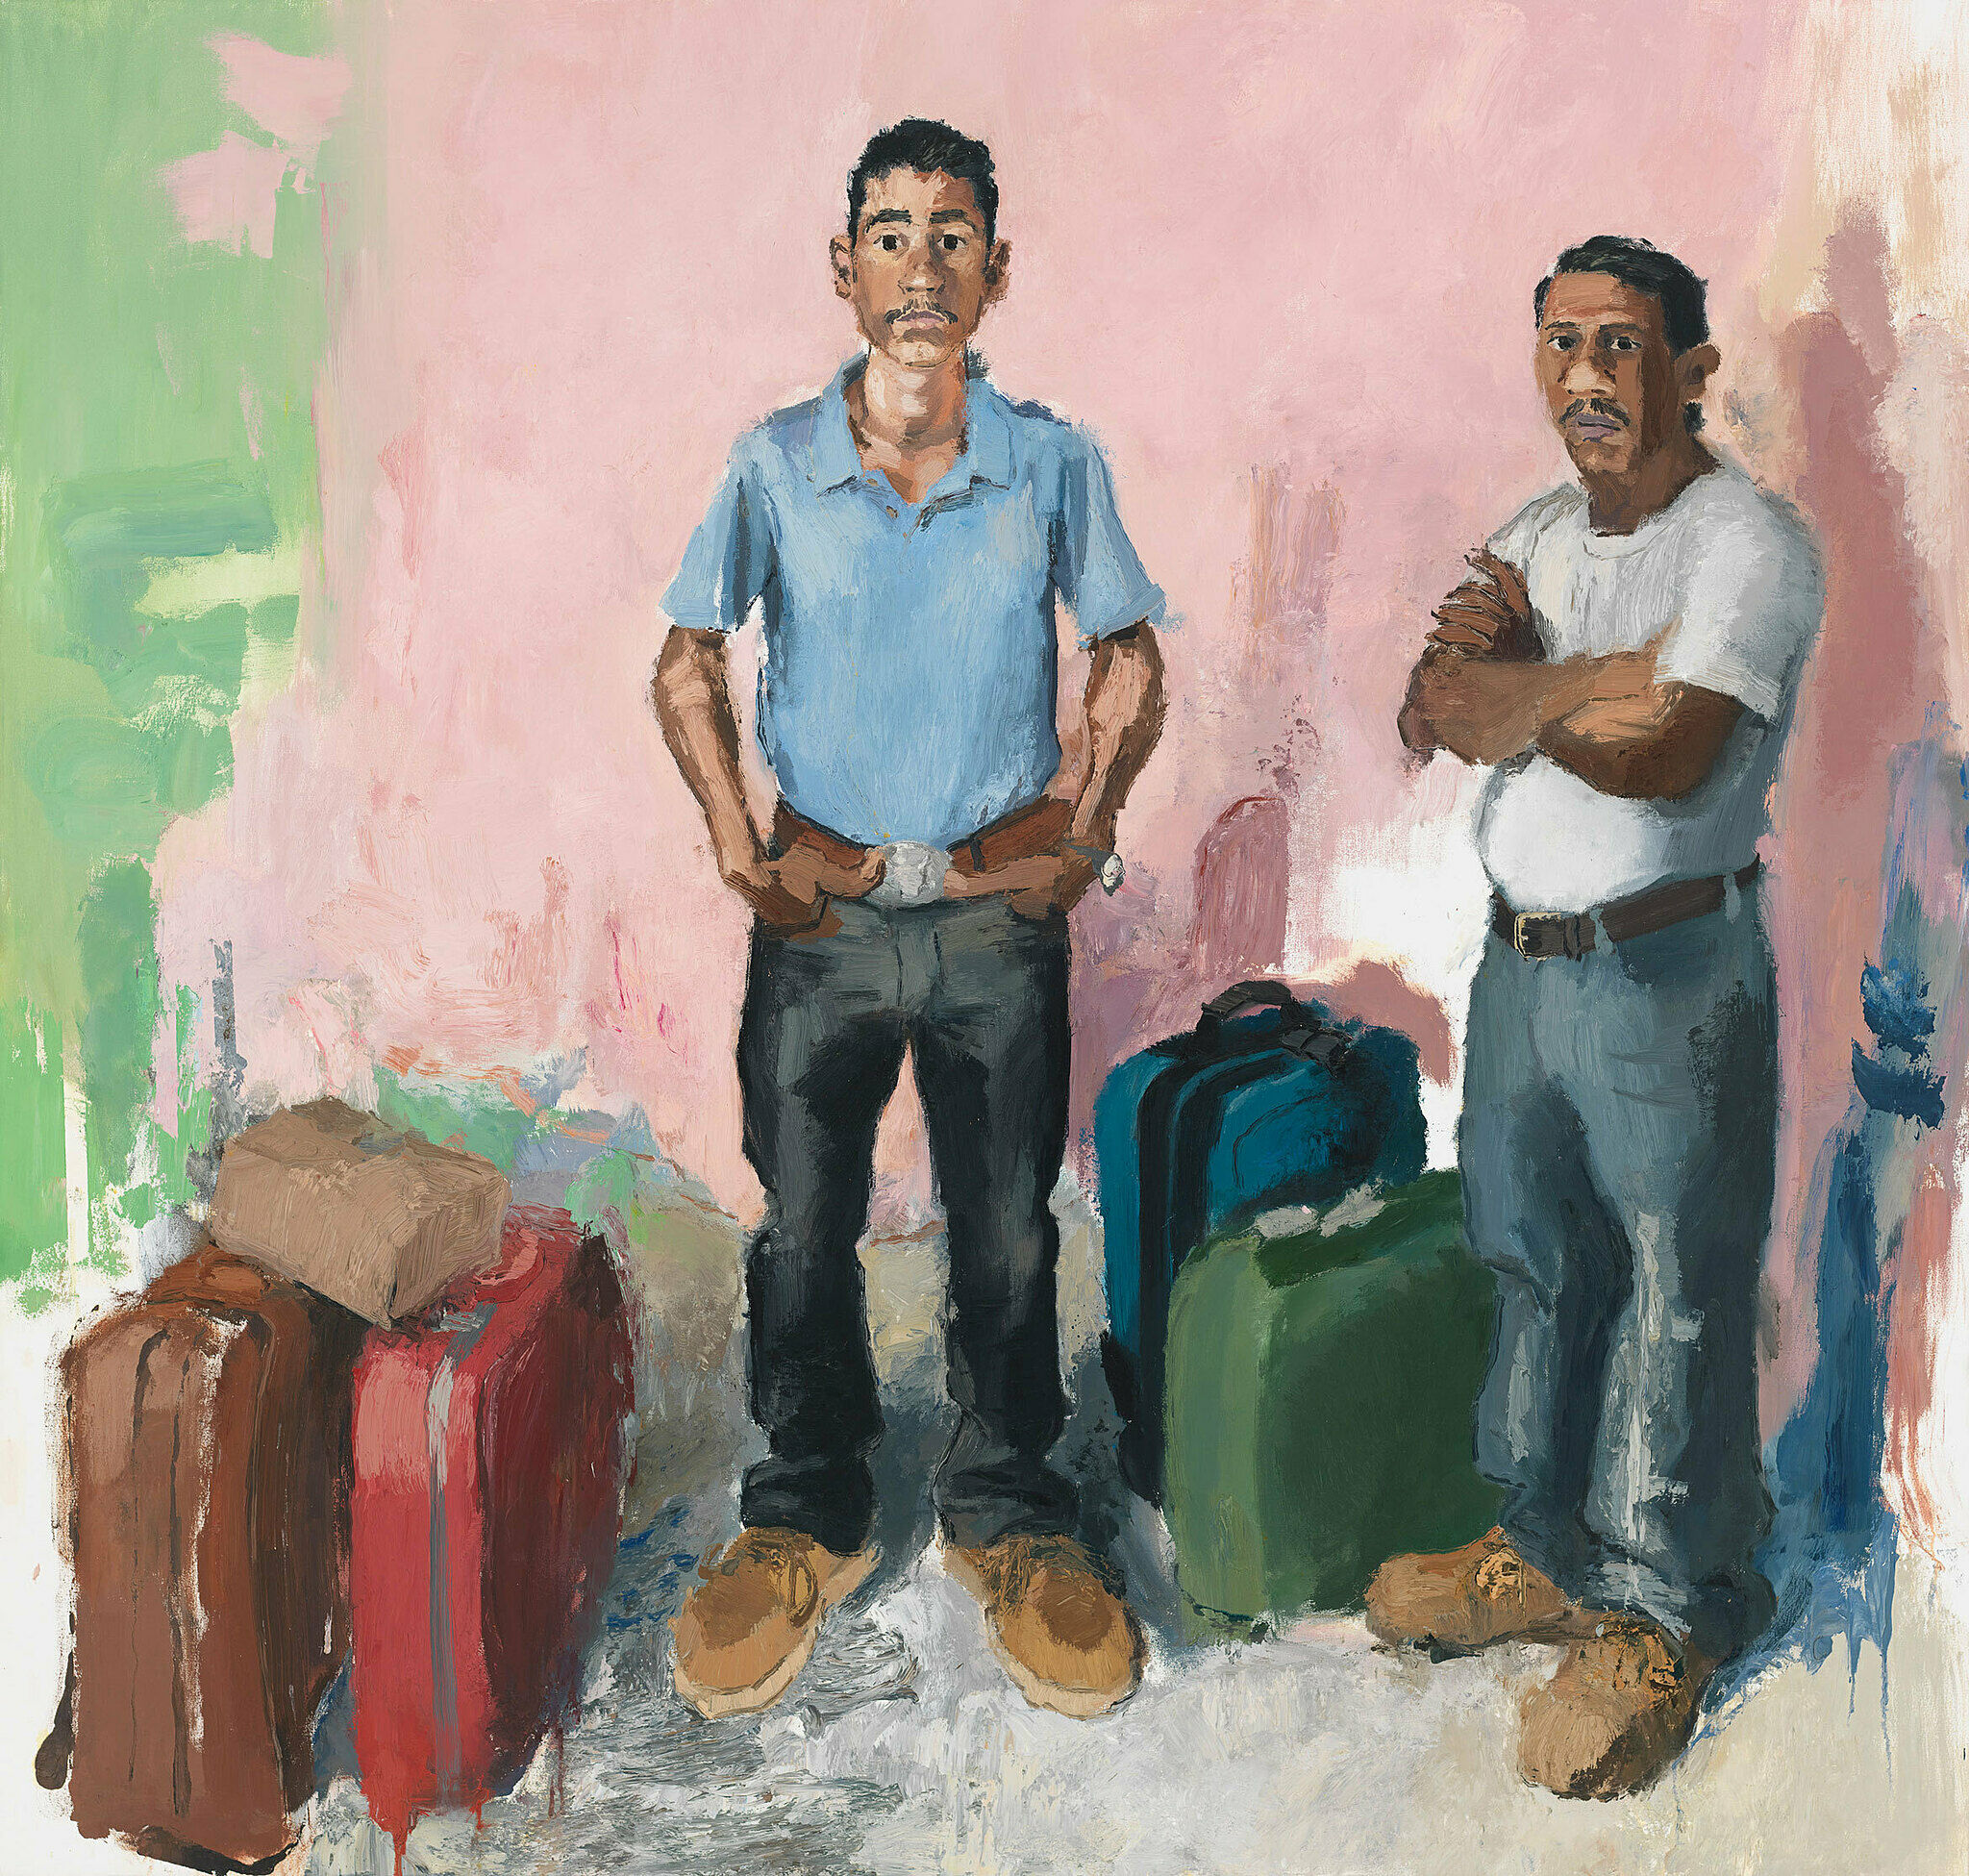 A painting by John Sonsini. Two central figures, Byron and Ramiro, stand with their arms crossed and hands on their hips. Each has two or three packed suitcases next to them